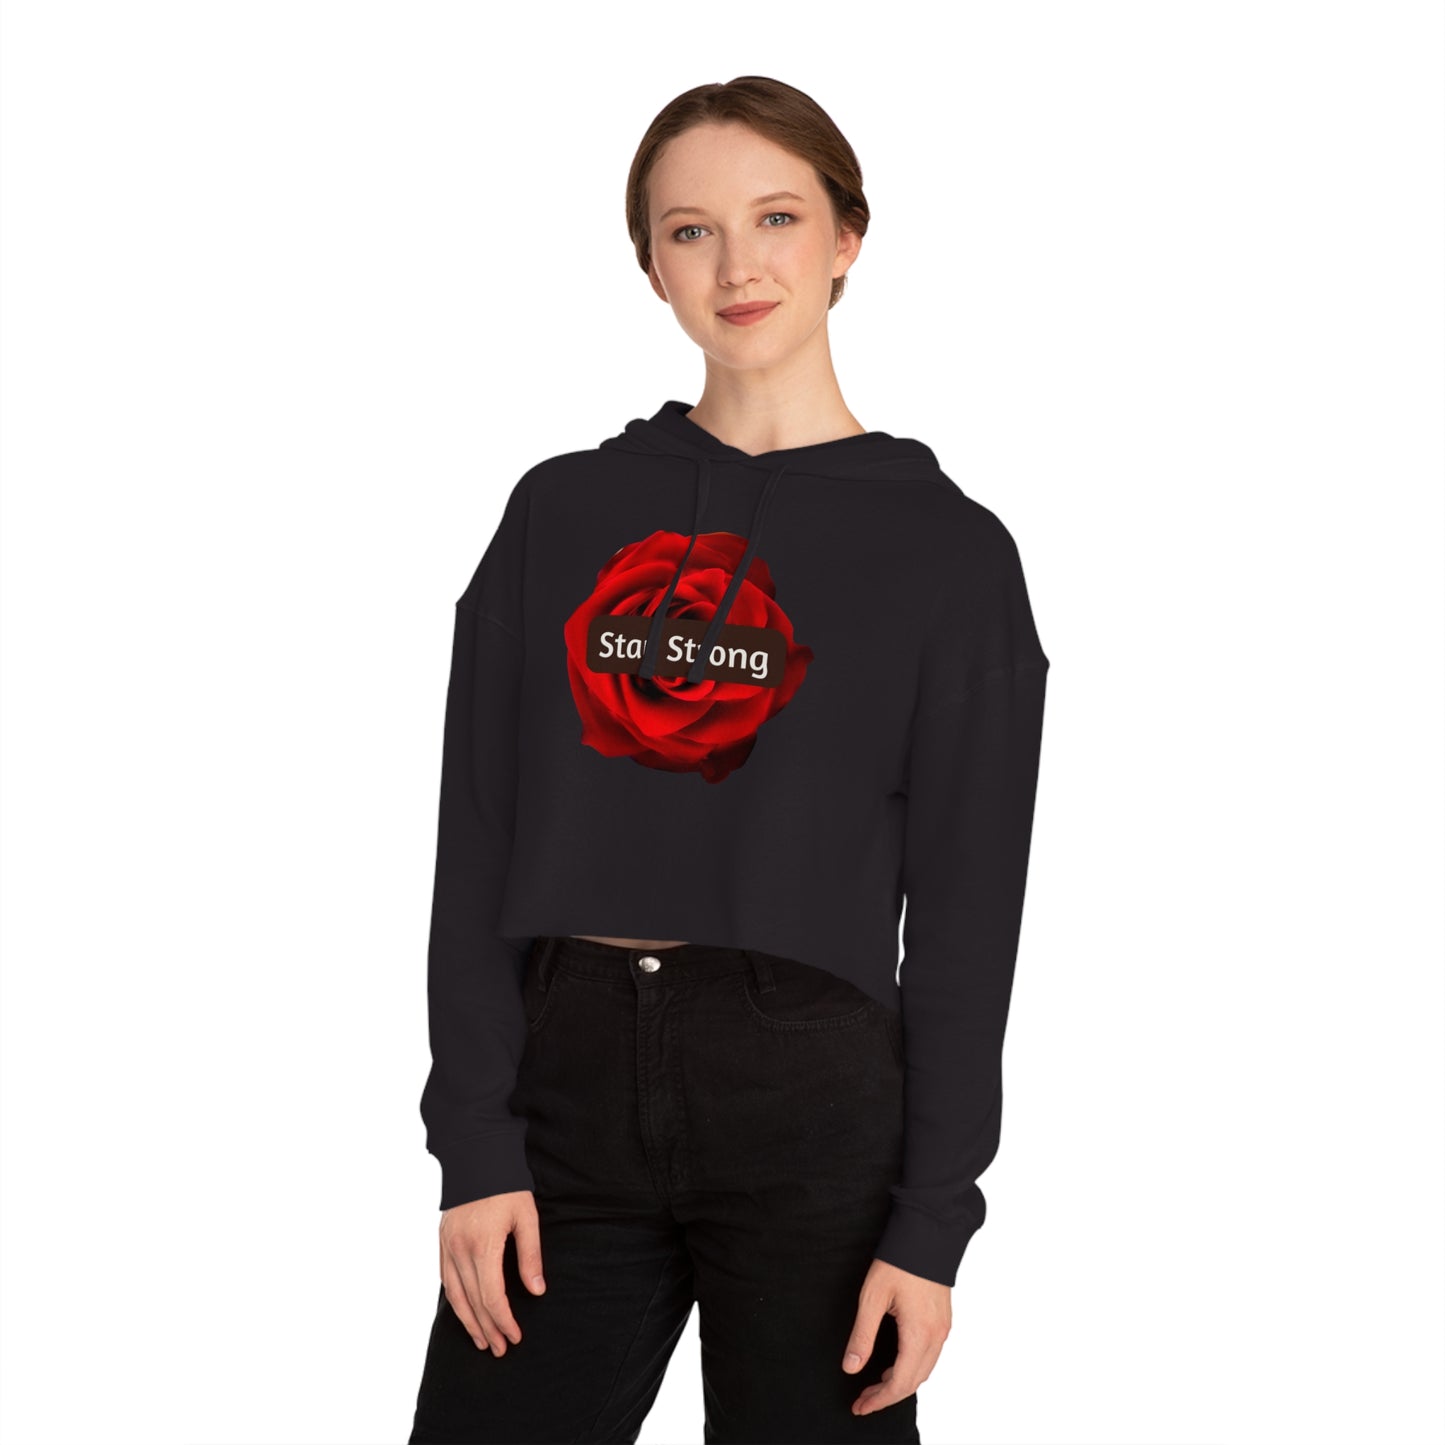 Rosy “Stay Strong” message on this Women’s Cropped Hooded Sweatshirt for your enjoyment.